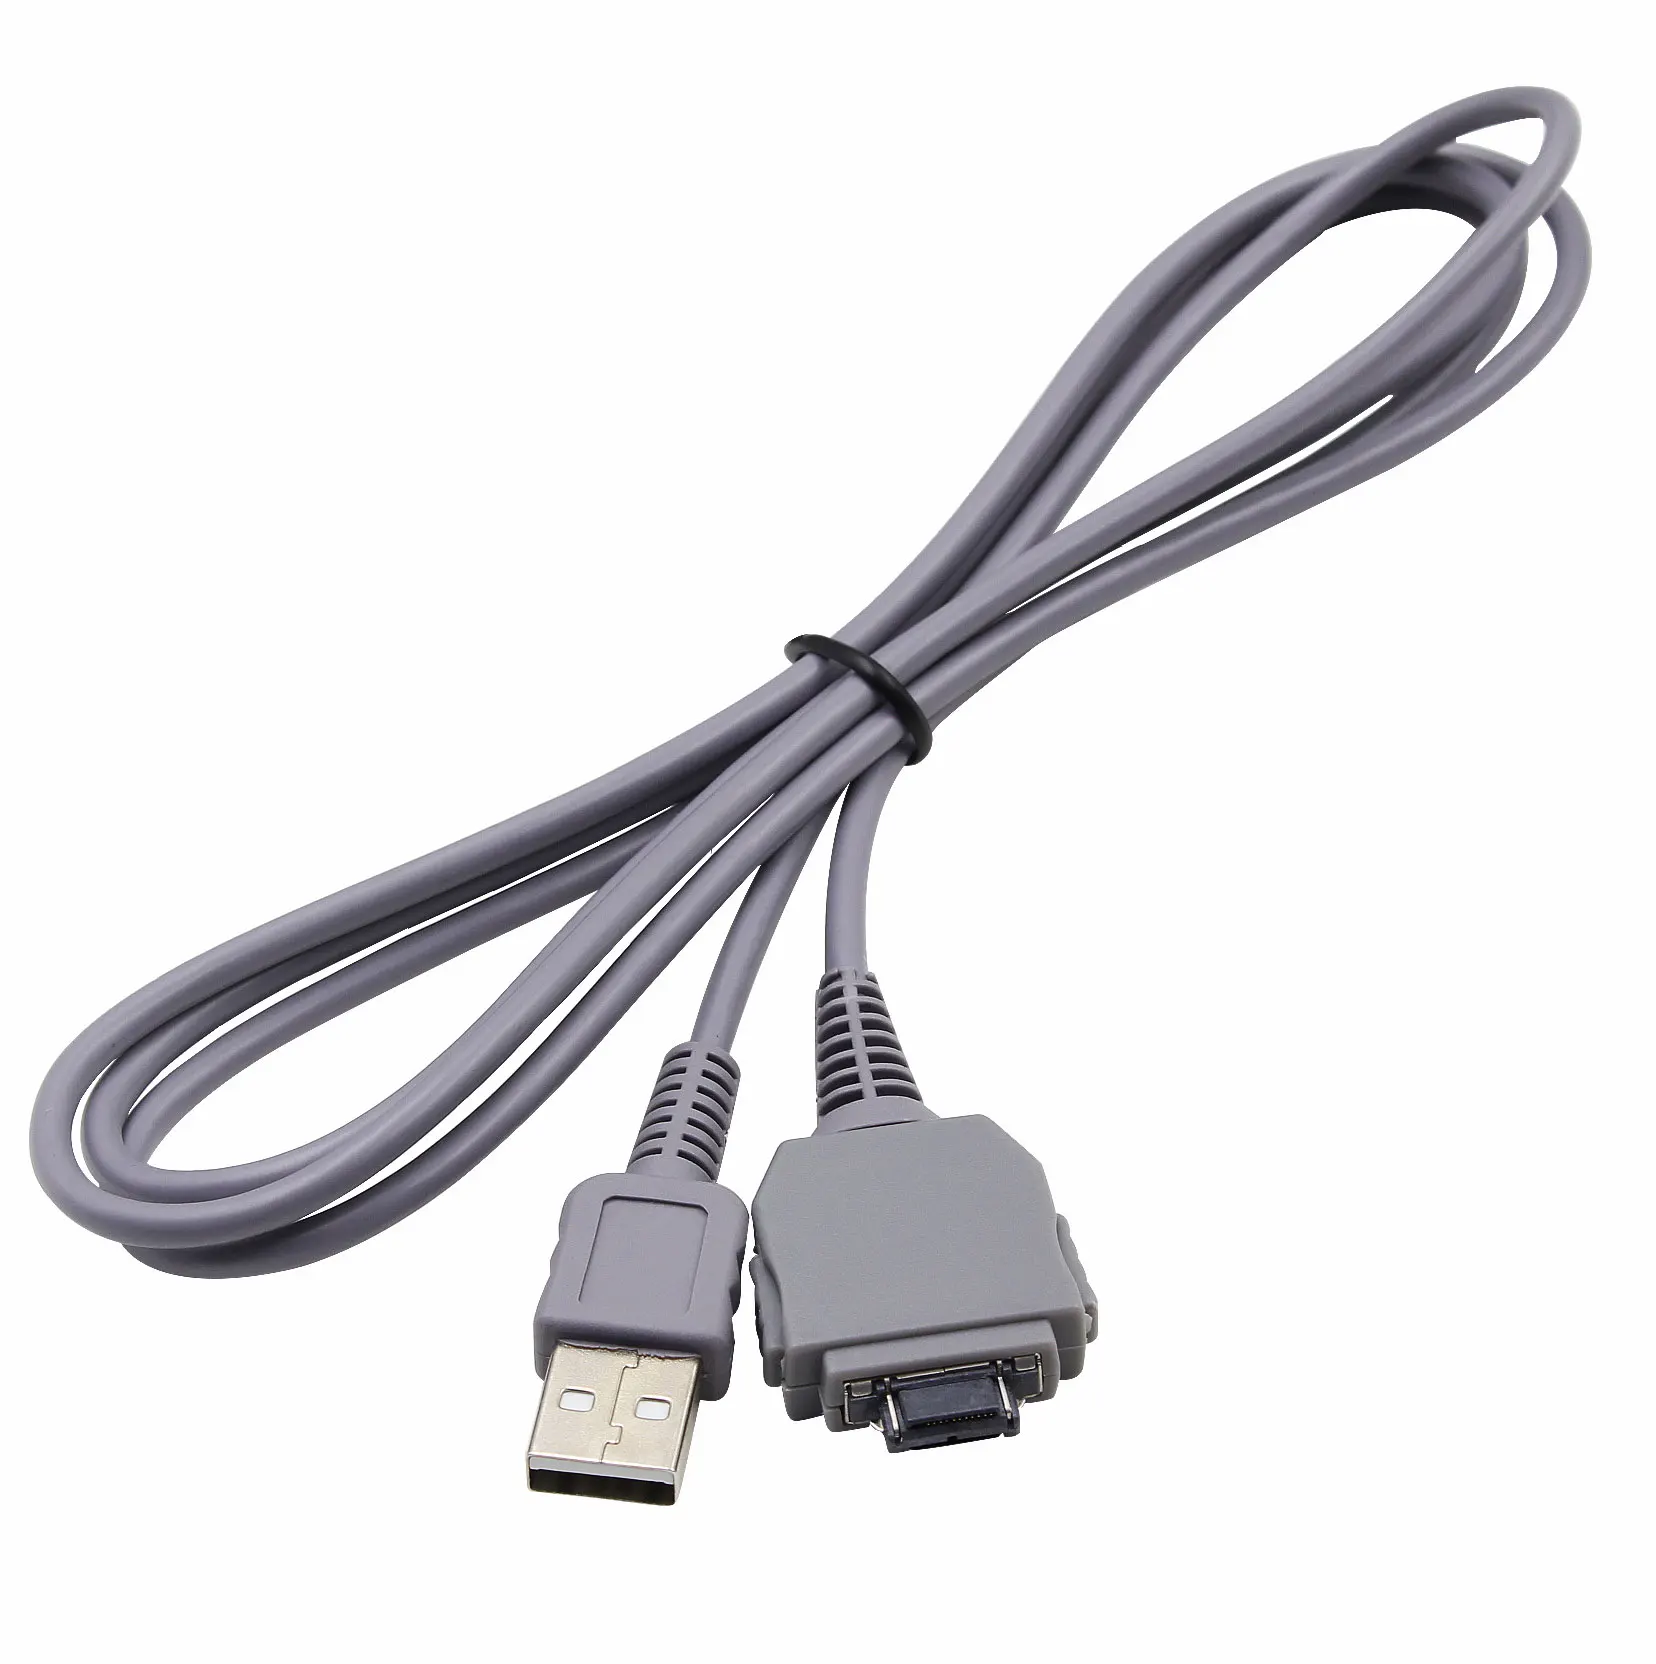 

USB Data Sync Cable Lead for Sony Cyber-Shot DSC-F88, T2, T5, T9, T10, T20, T30